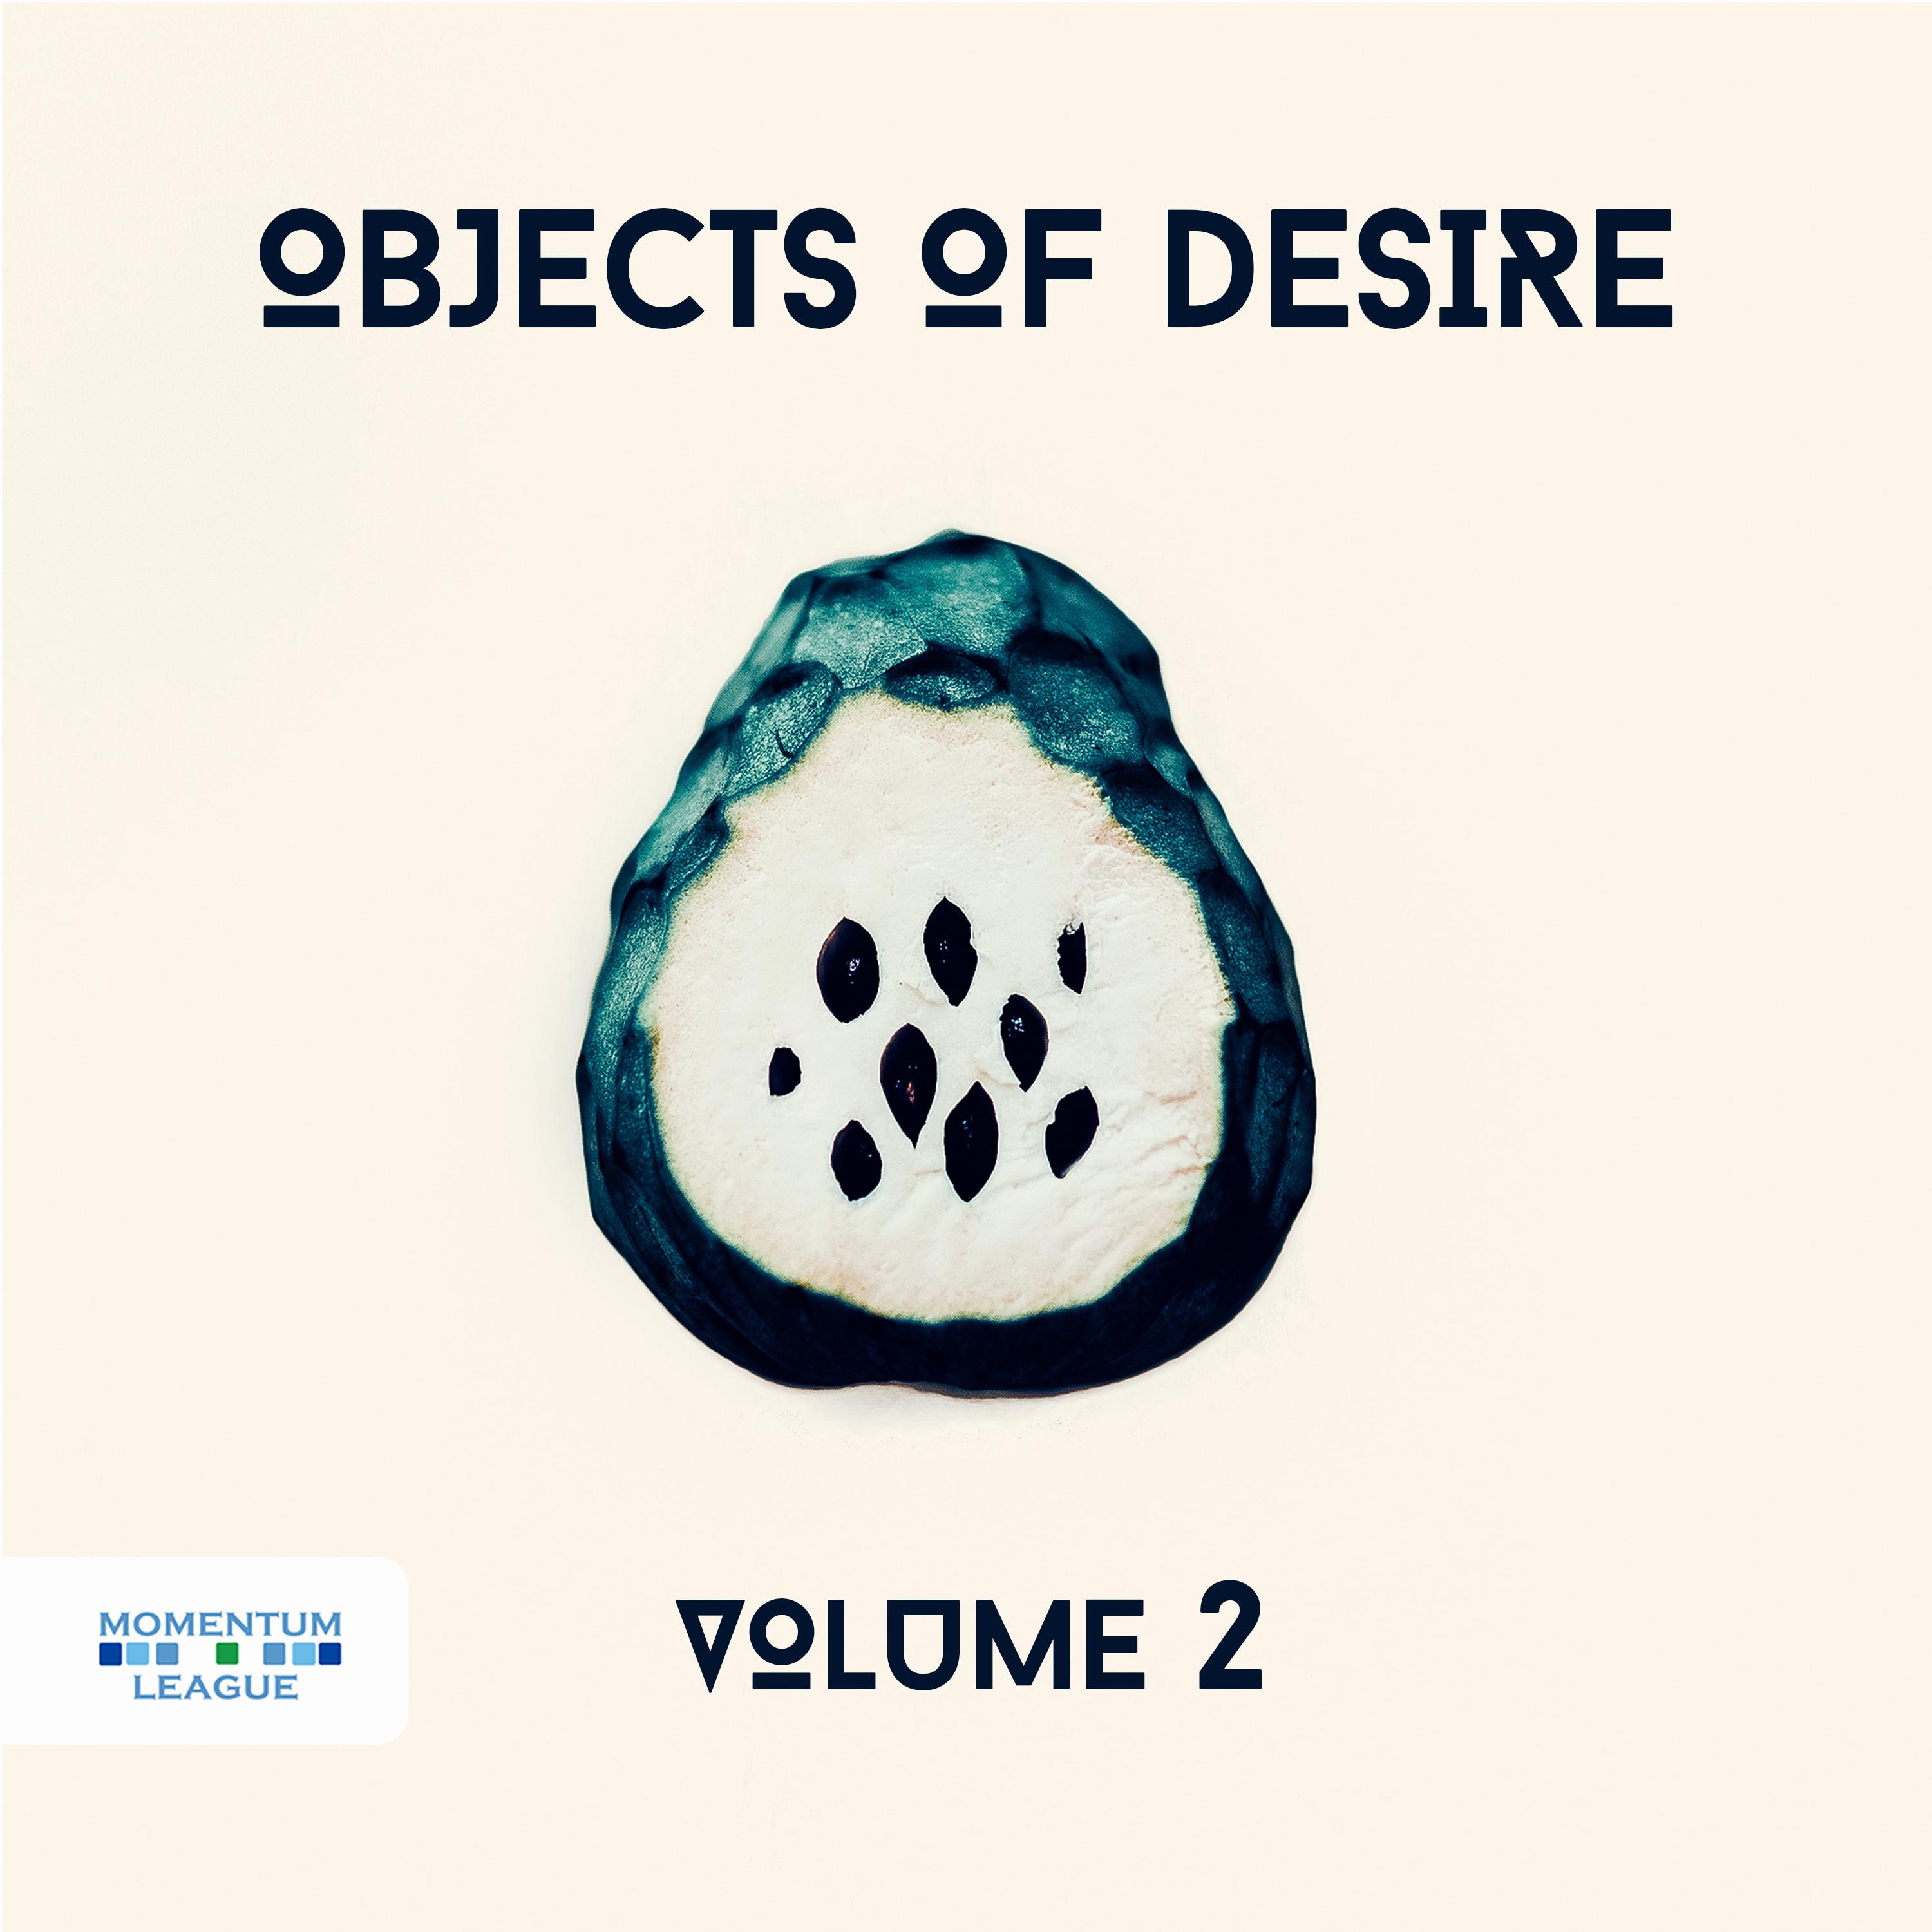 Objects of Desire, Vol. 2